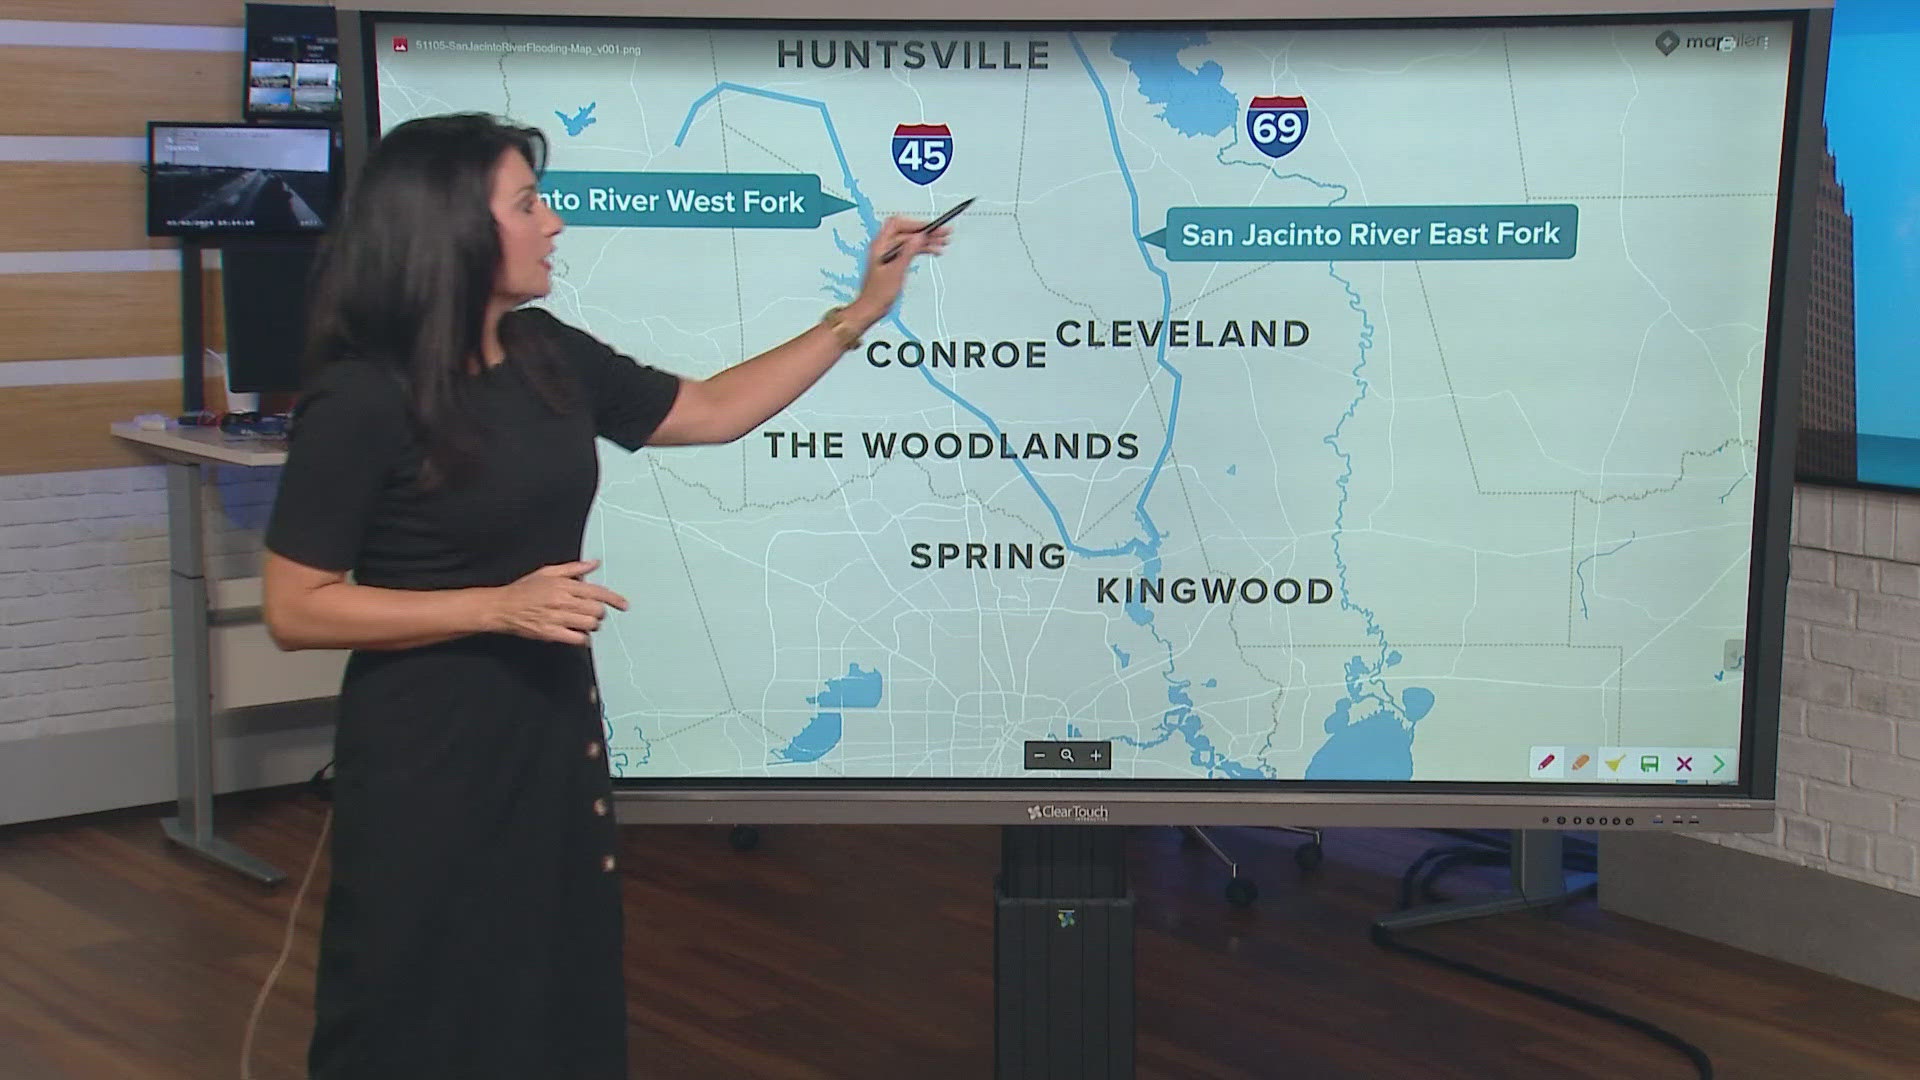 Cheryl Mercedes explains the geography of the San Jacinto River east and west forks and which rivers they go through.